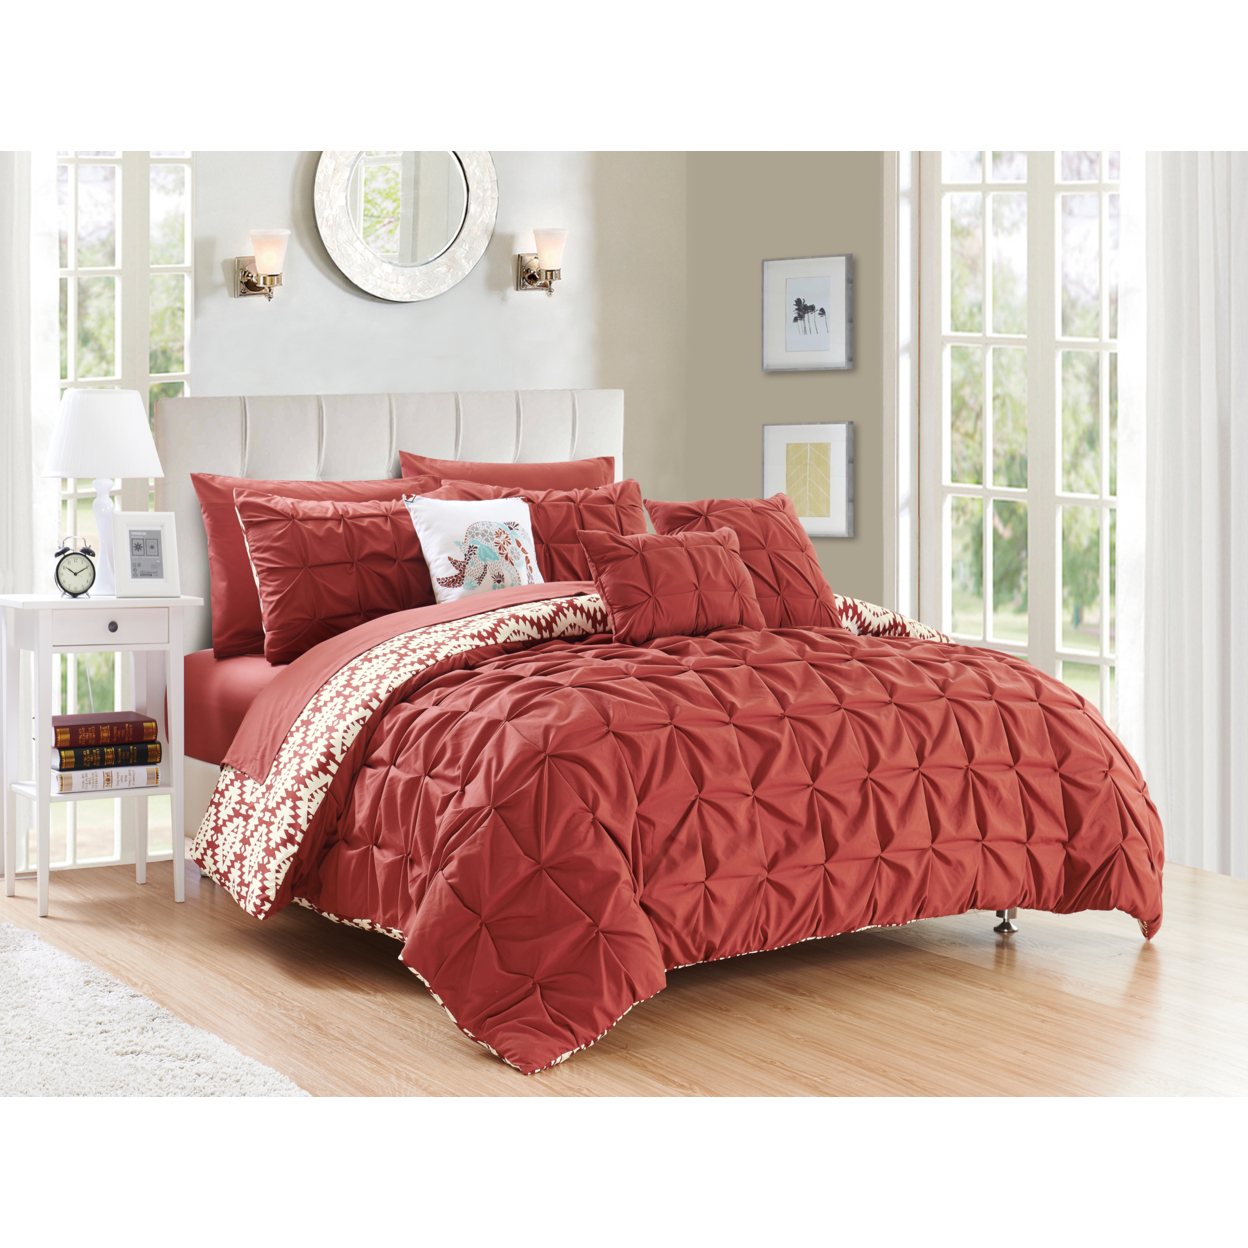 Rahab 10 Or 8 Piece Reversible Comforter Set Complete Bed In A Bag Pintuck Pleated And Aztec Inspired - Brick, Twin